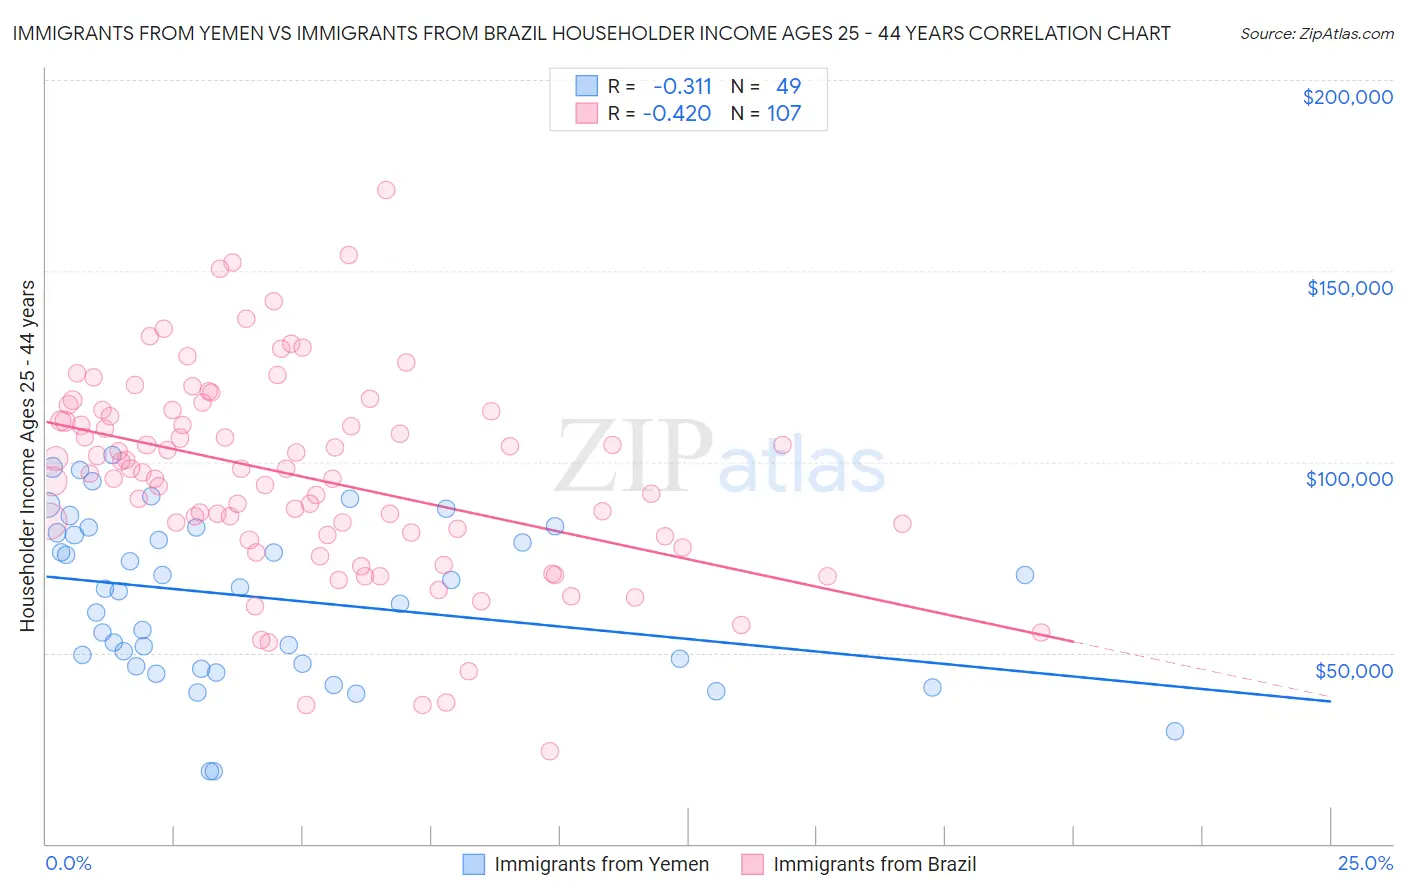 Immigrants from Yemen vs Immigrants from Brazil Householder Income Ages 25 - 44 years